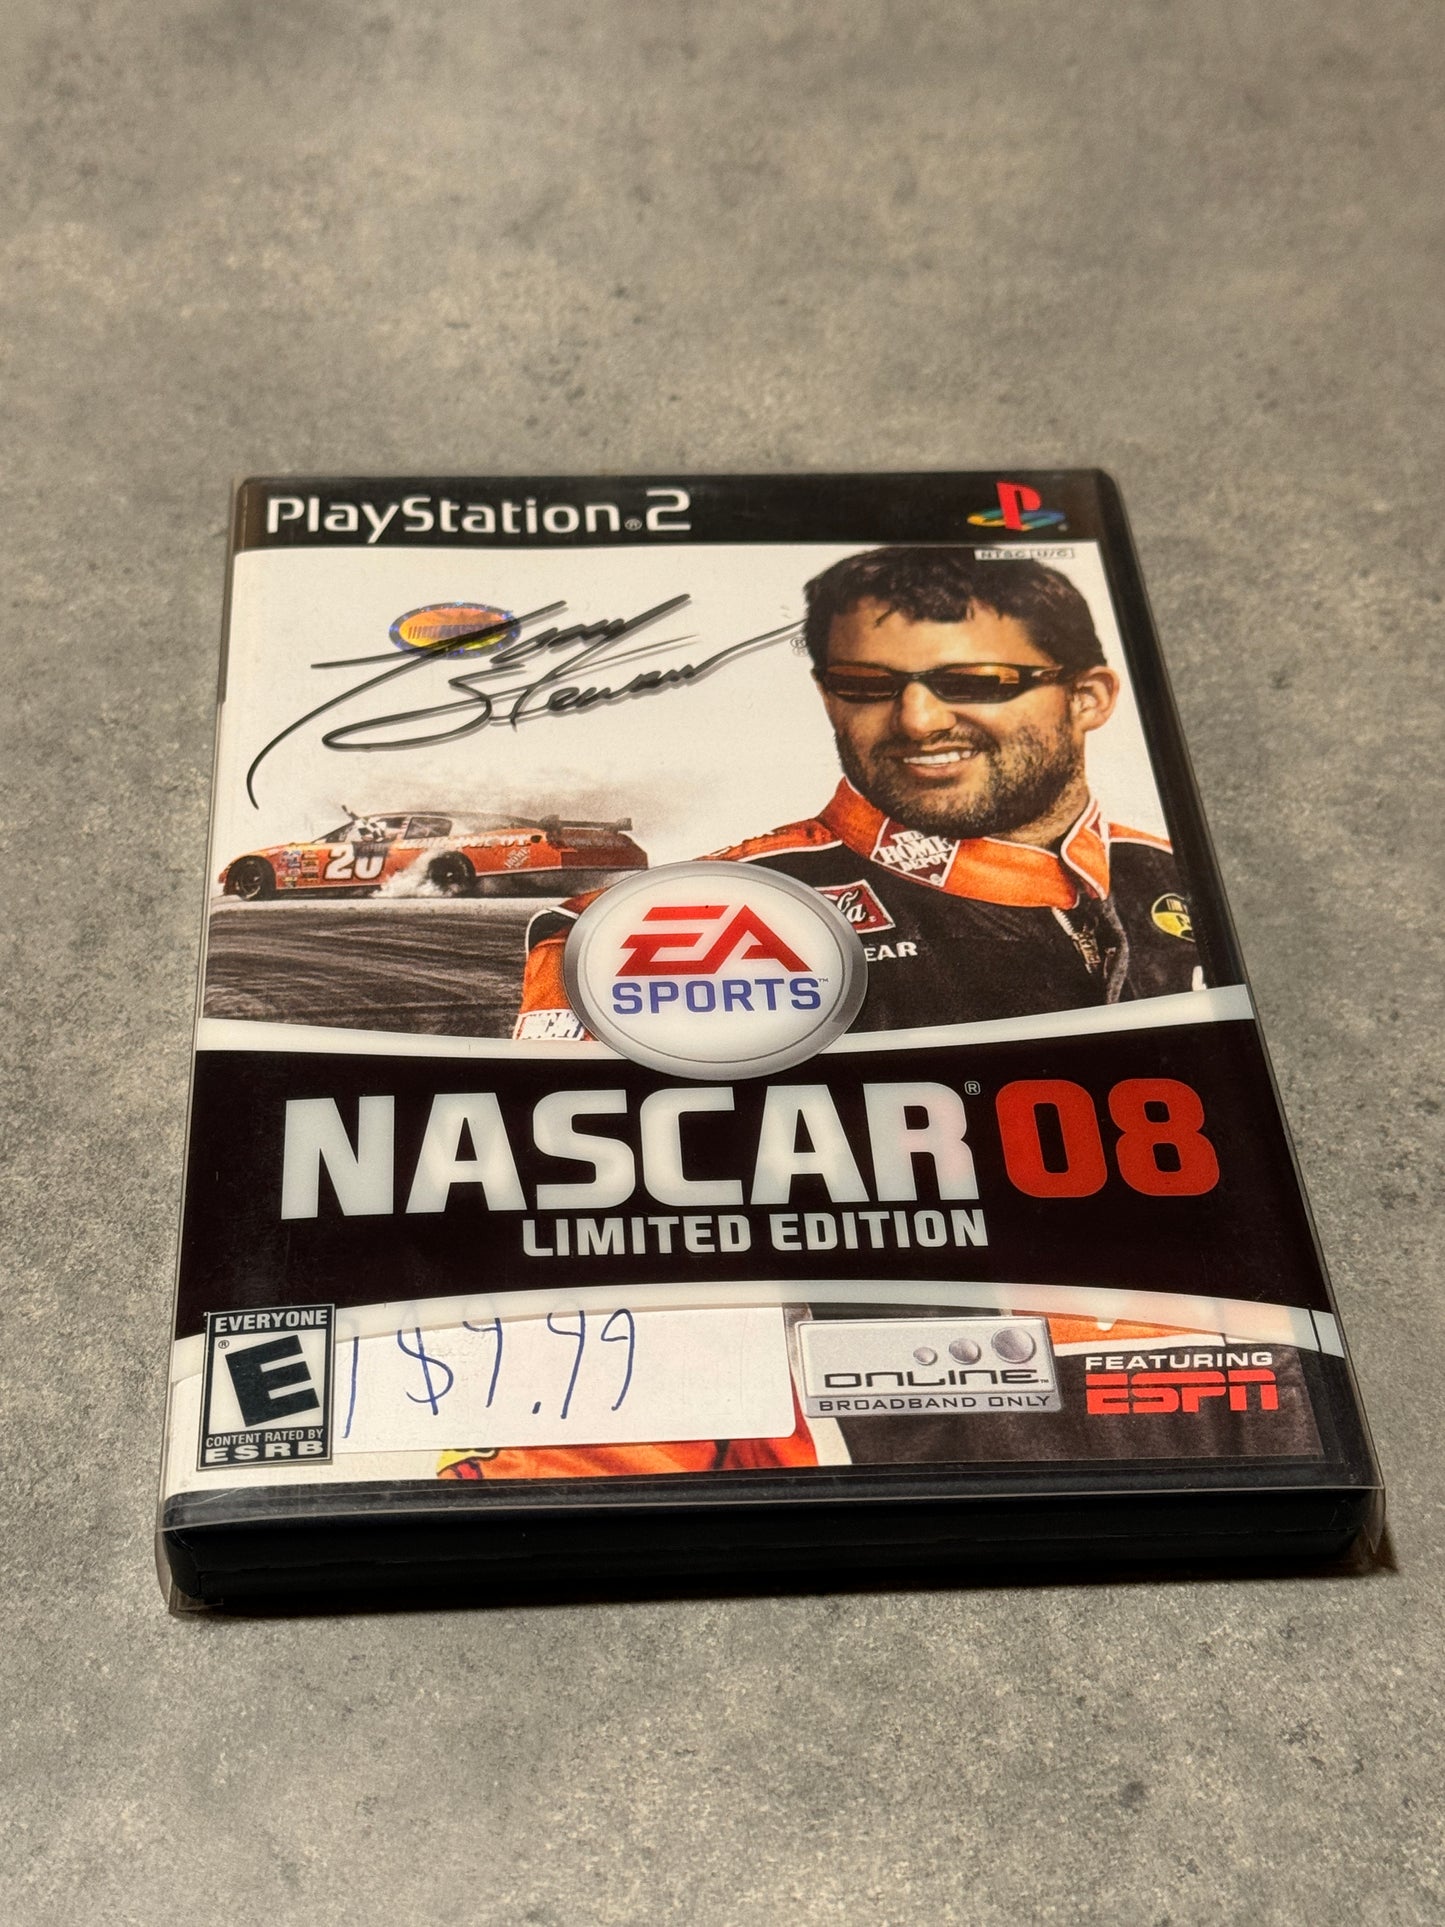 NASCAR 08 Limited Edition - PS2 Game